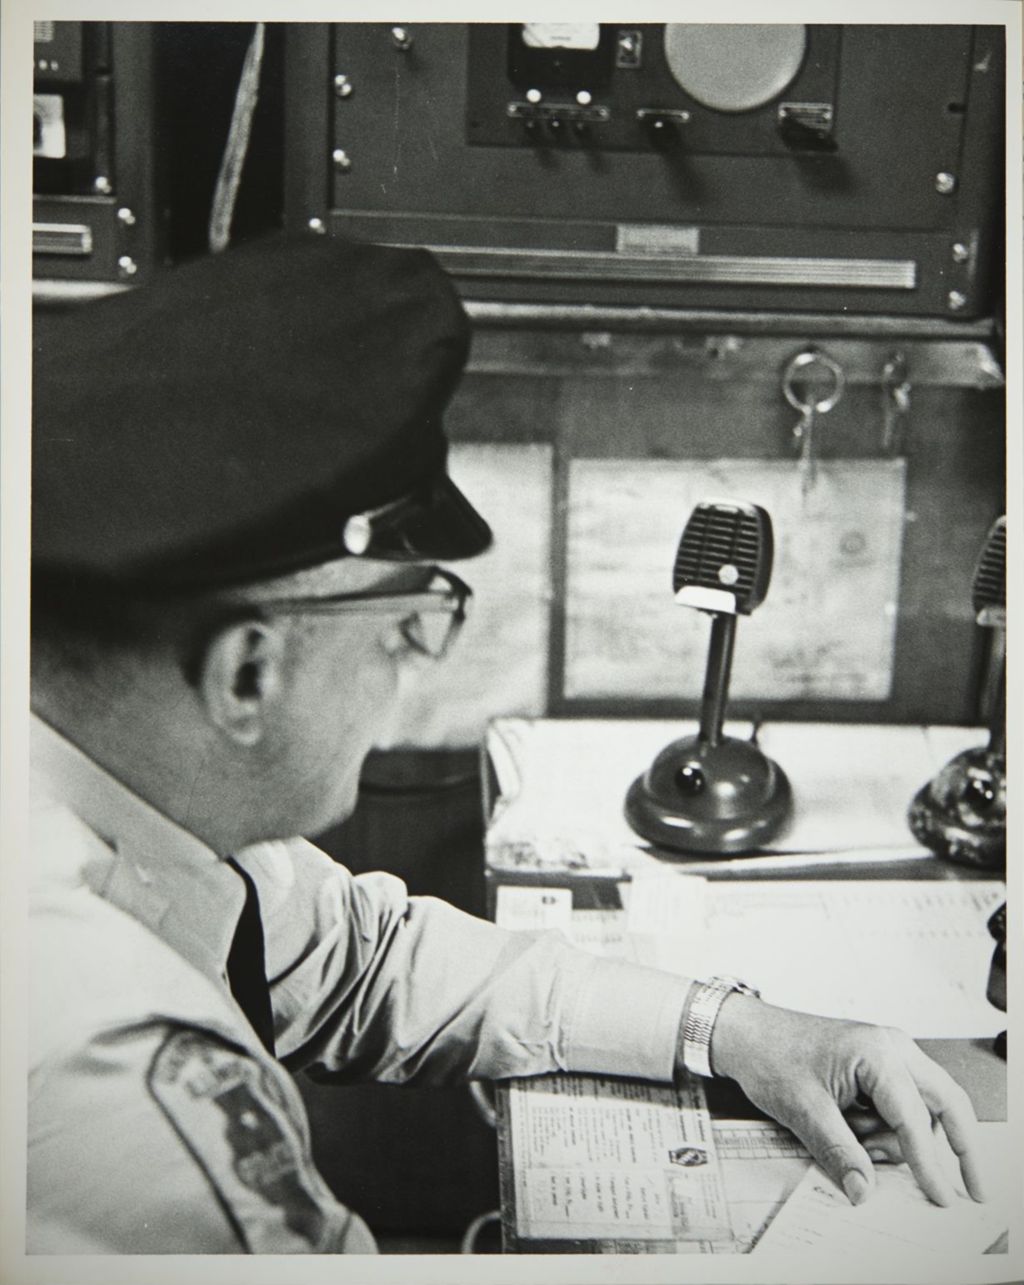 Miniature of University police person in the police station